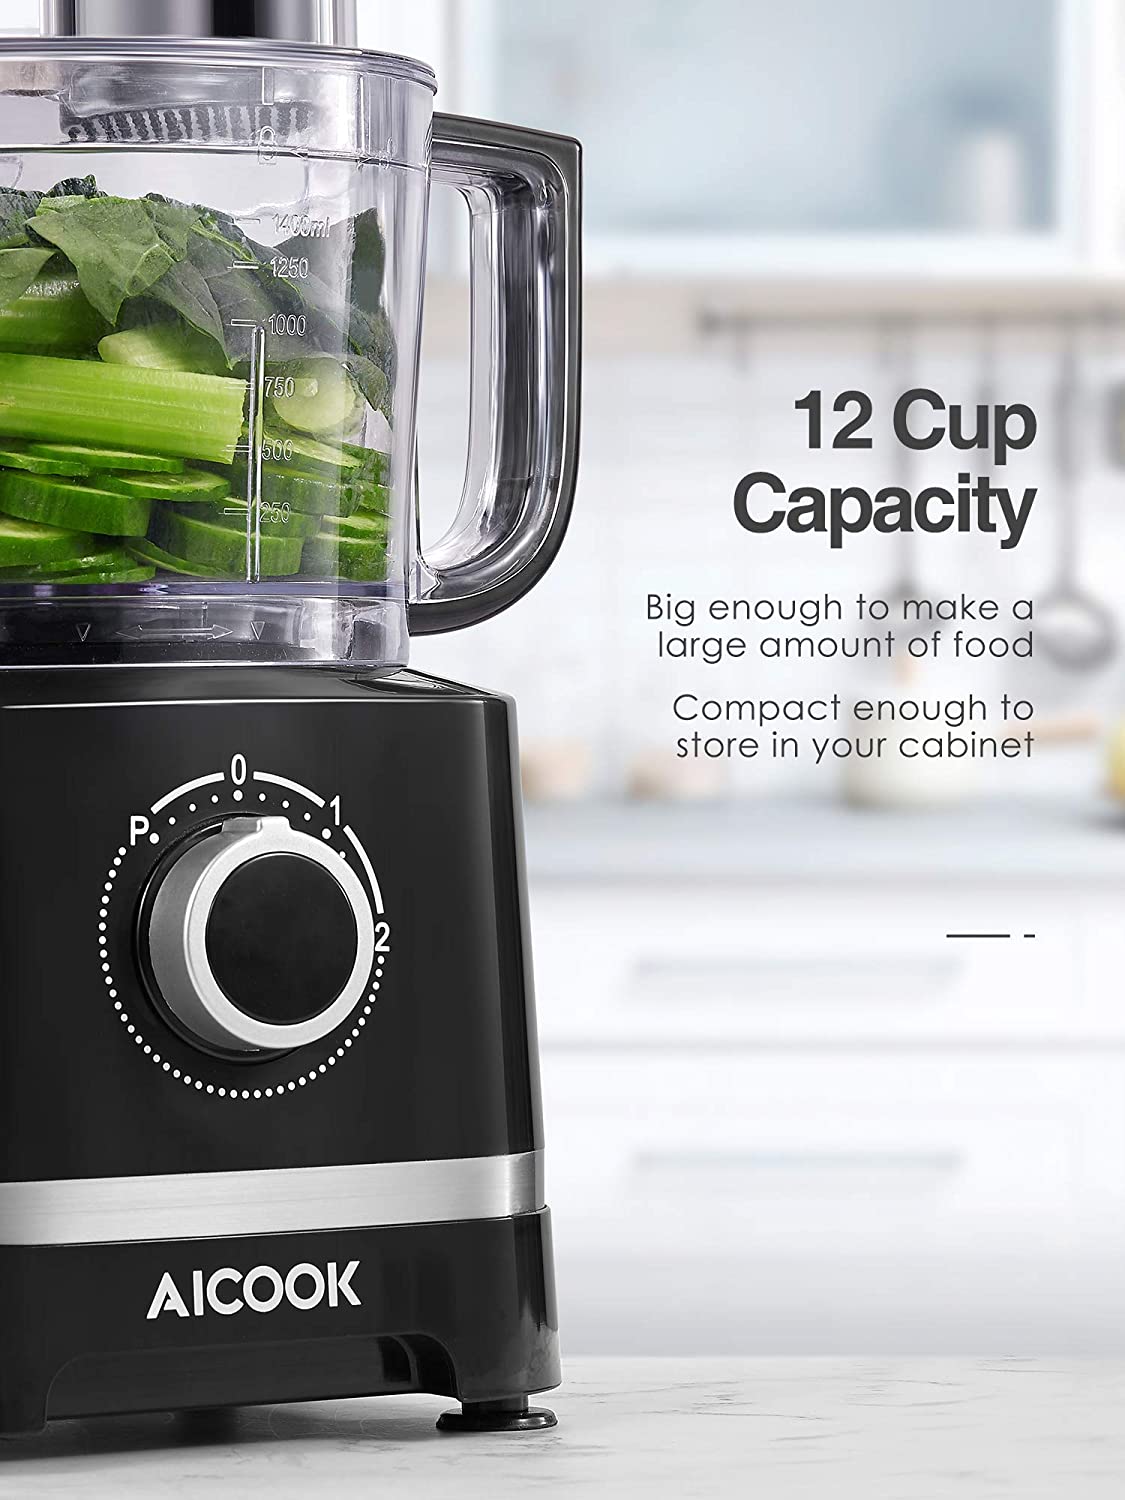 AICOOK | Food Processor, 12-Cup Food Chopper with 16 Functions, 4 Speeds Vegetable Chopper for Chopping, Pureeing, Mixing, Shredding, Whisking Eggs and Slicing